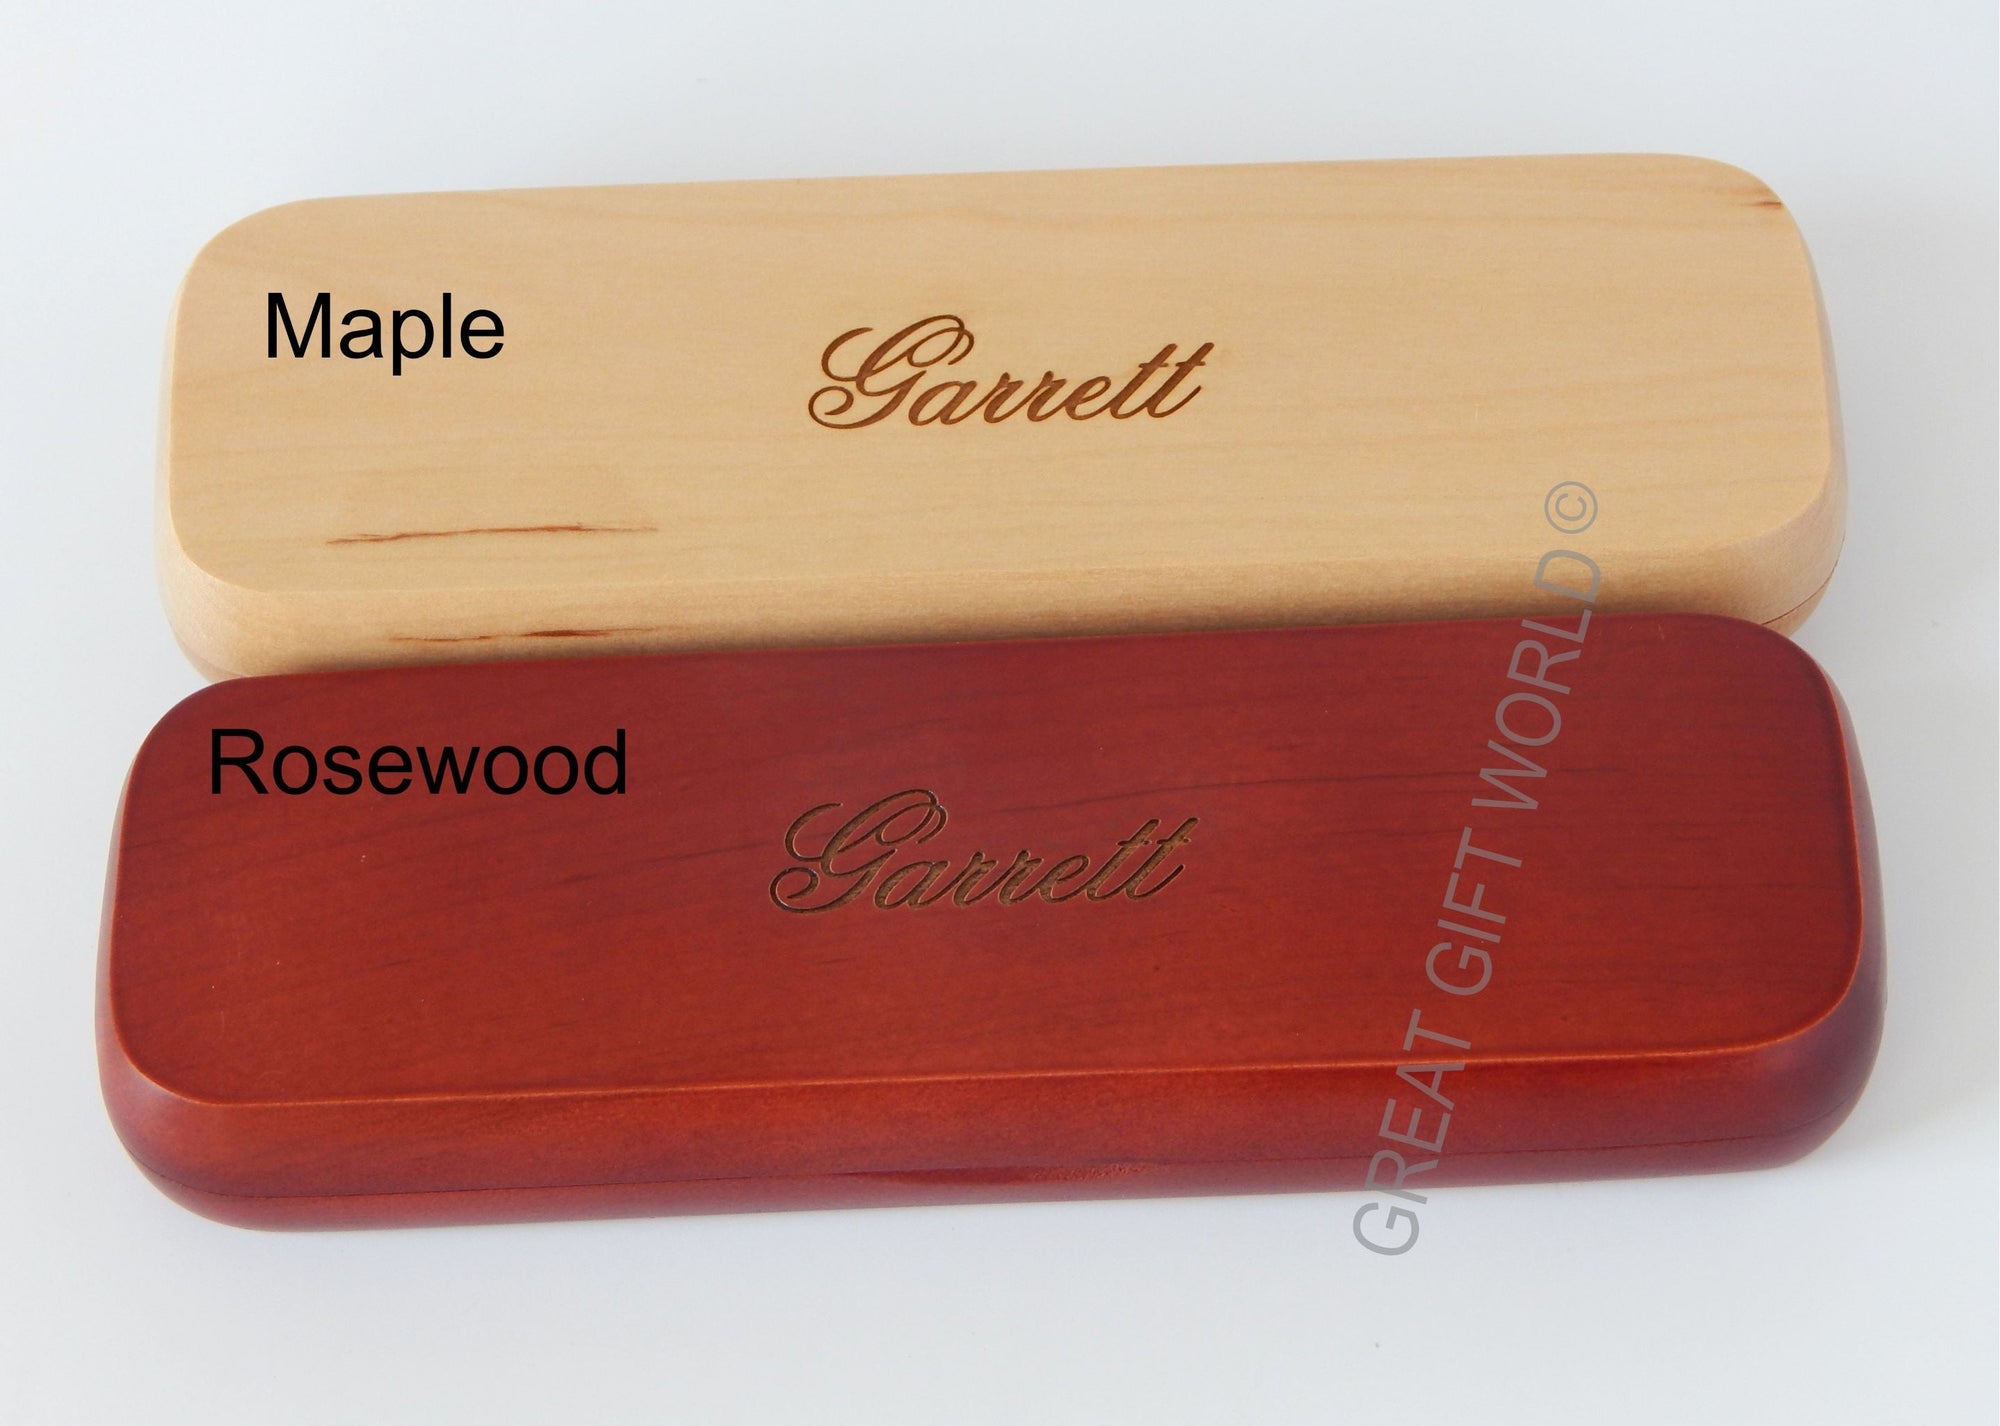 Christmas Gift for Priest | Deacon Gifts | Personalized Wooden Pen